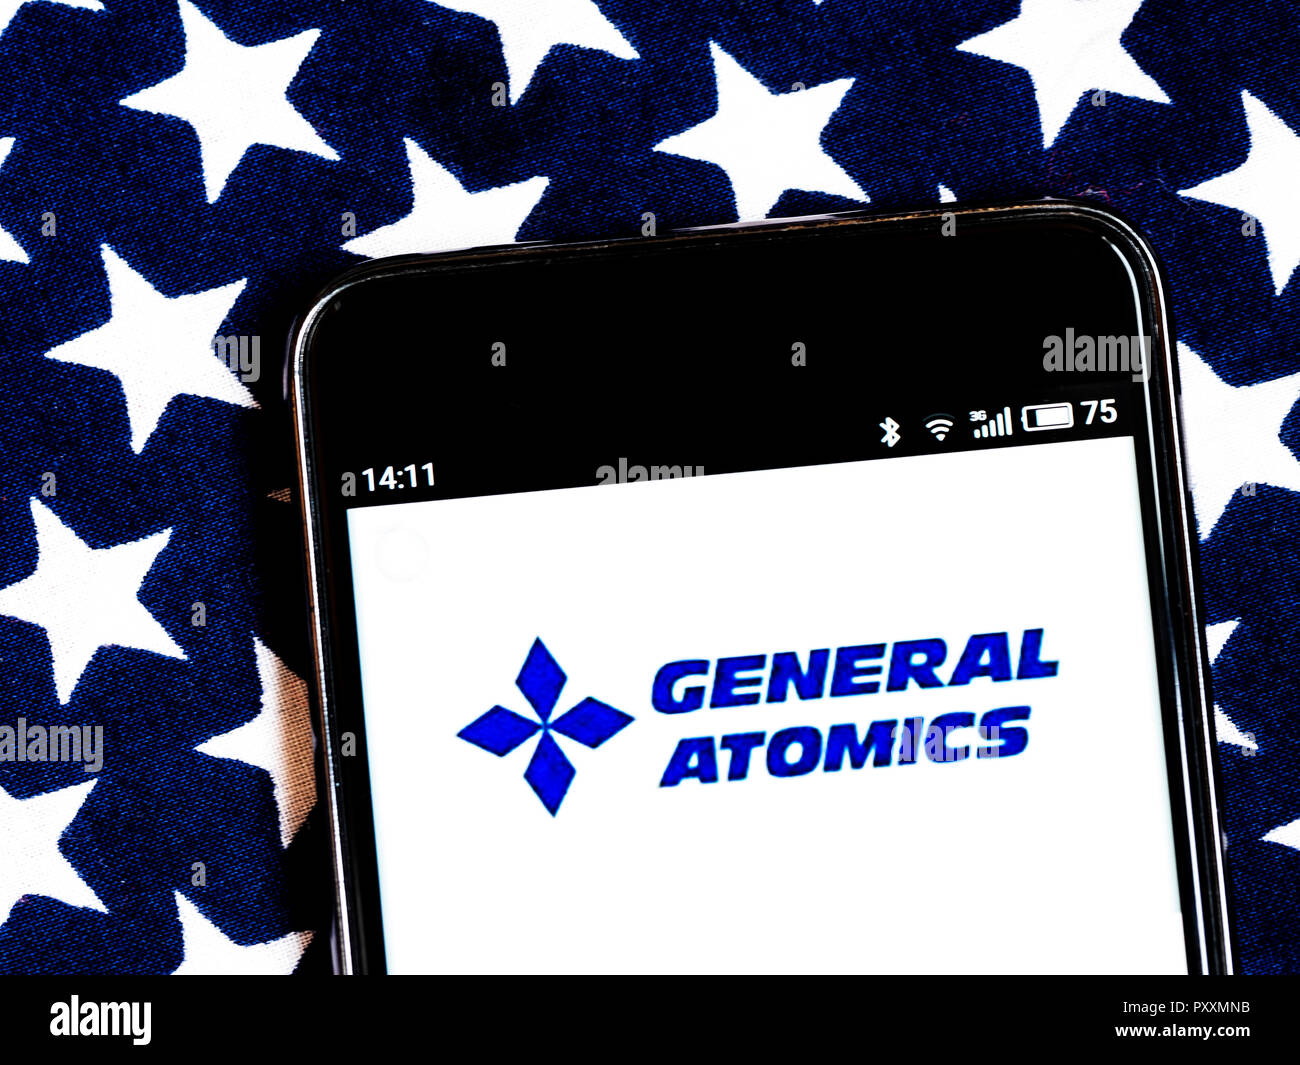 General Atomics Defense contractor company logo seen displayed on smart phone. General Atomics is a defense contractor headquartered in San Diego, California, specializing in nuclear physics including nuclear fission and nuclear fusion. Stock Photo